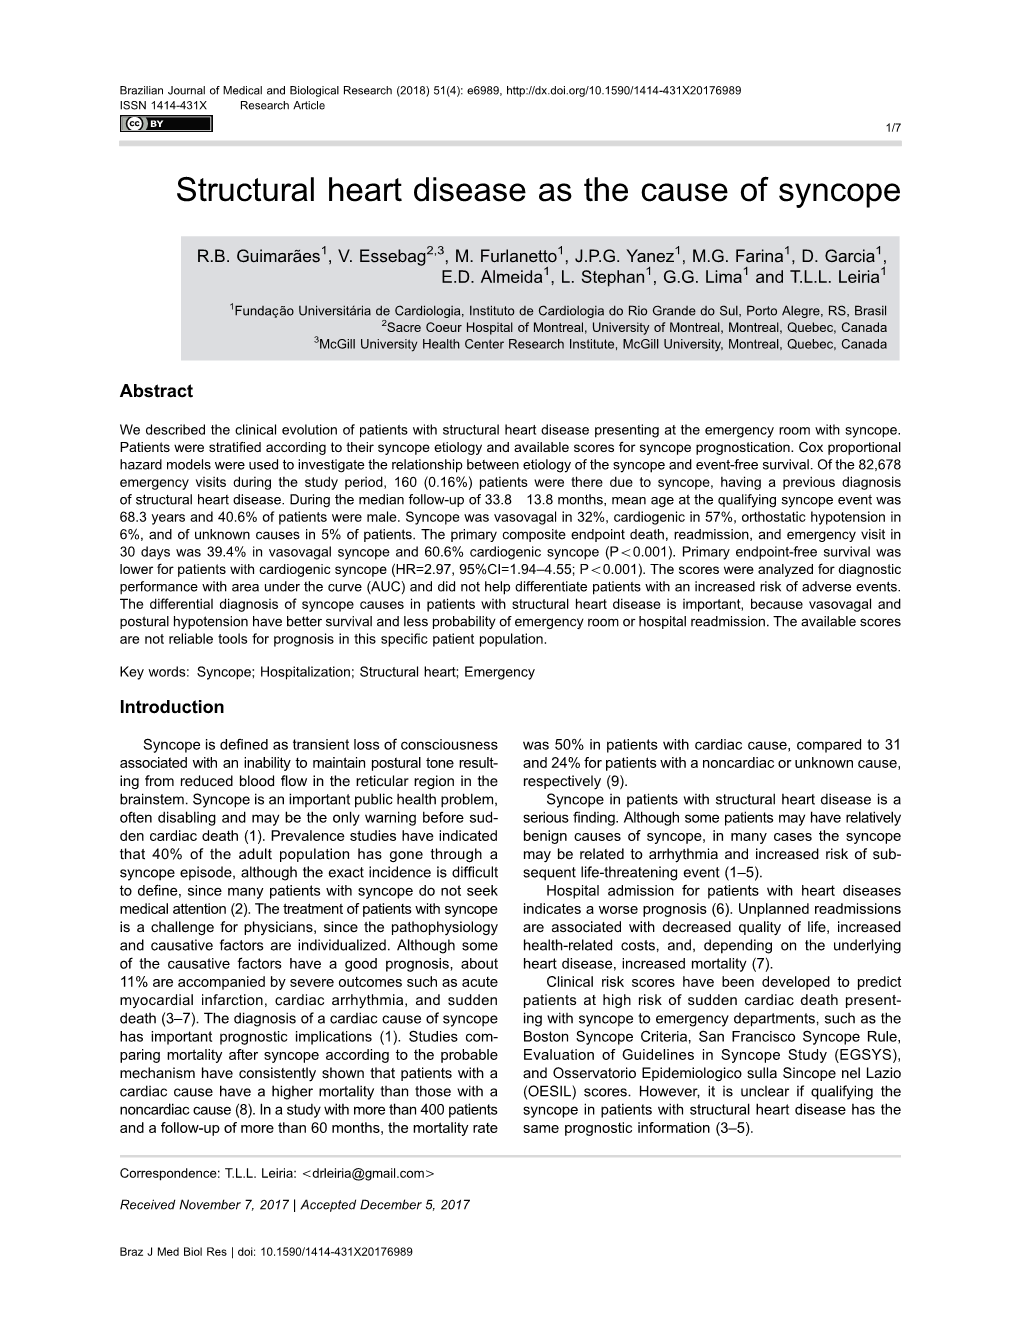 Structural Heart Disease As the Cause of Syncope